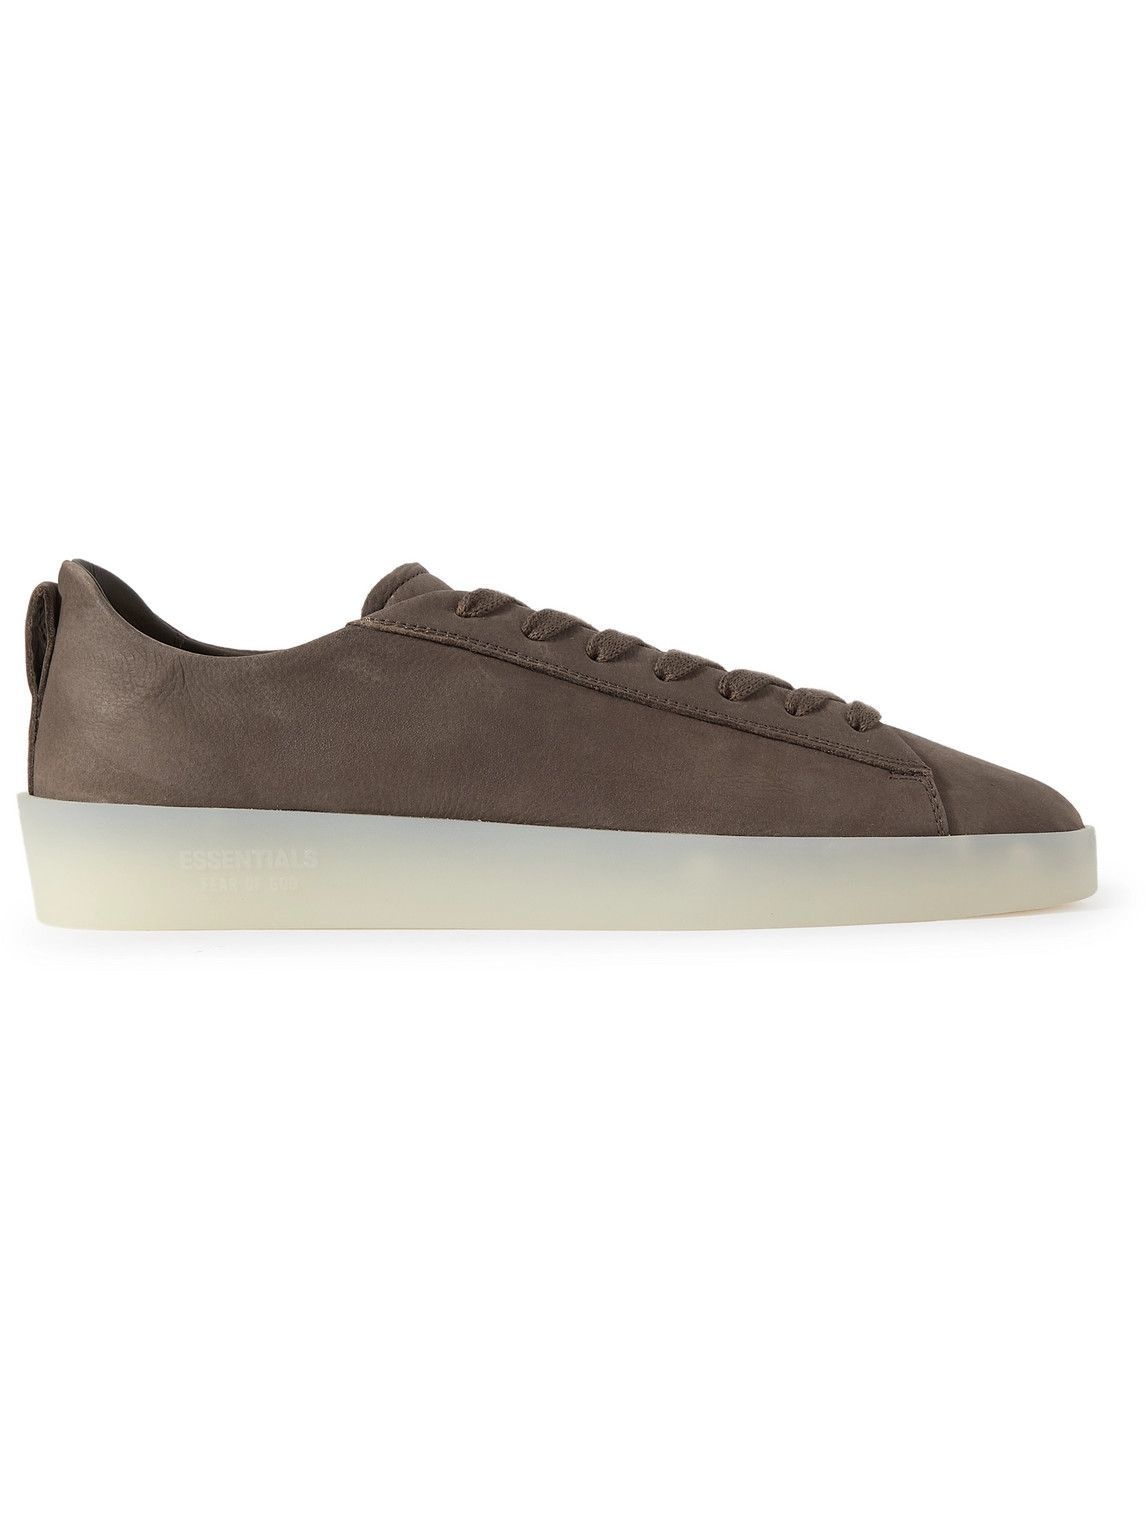 Photo: FEAR OF GOD ESSENTIALS - Nubuck Sneakers - Brown